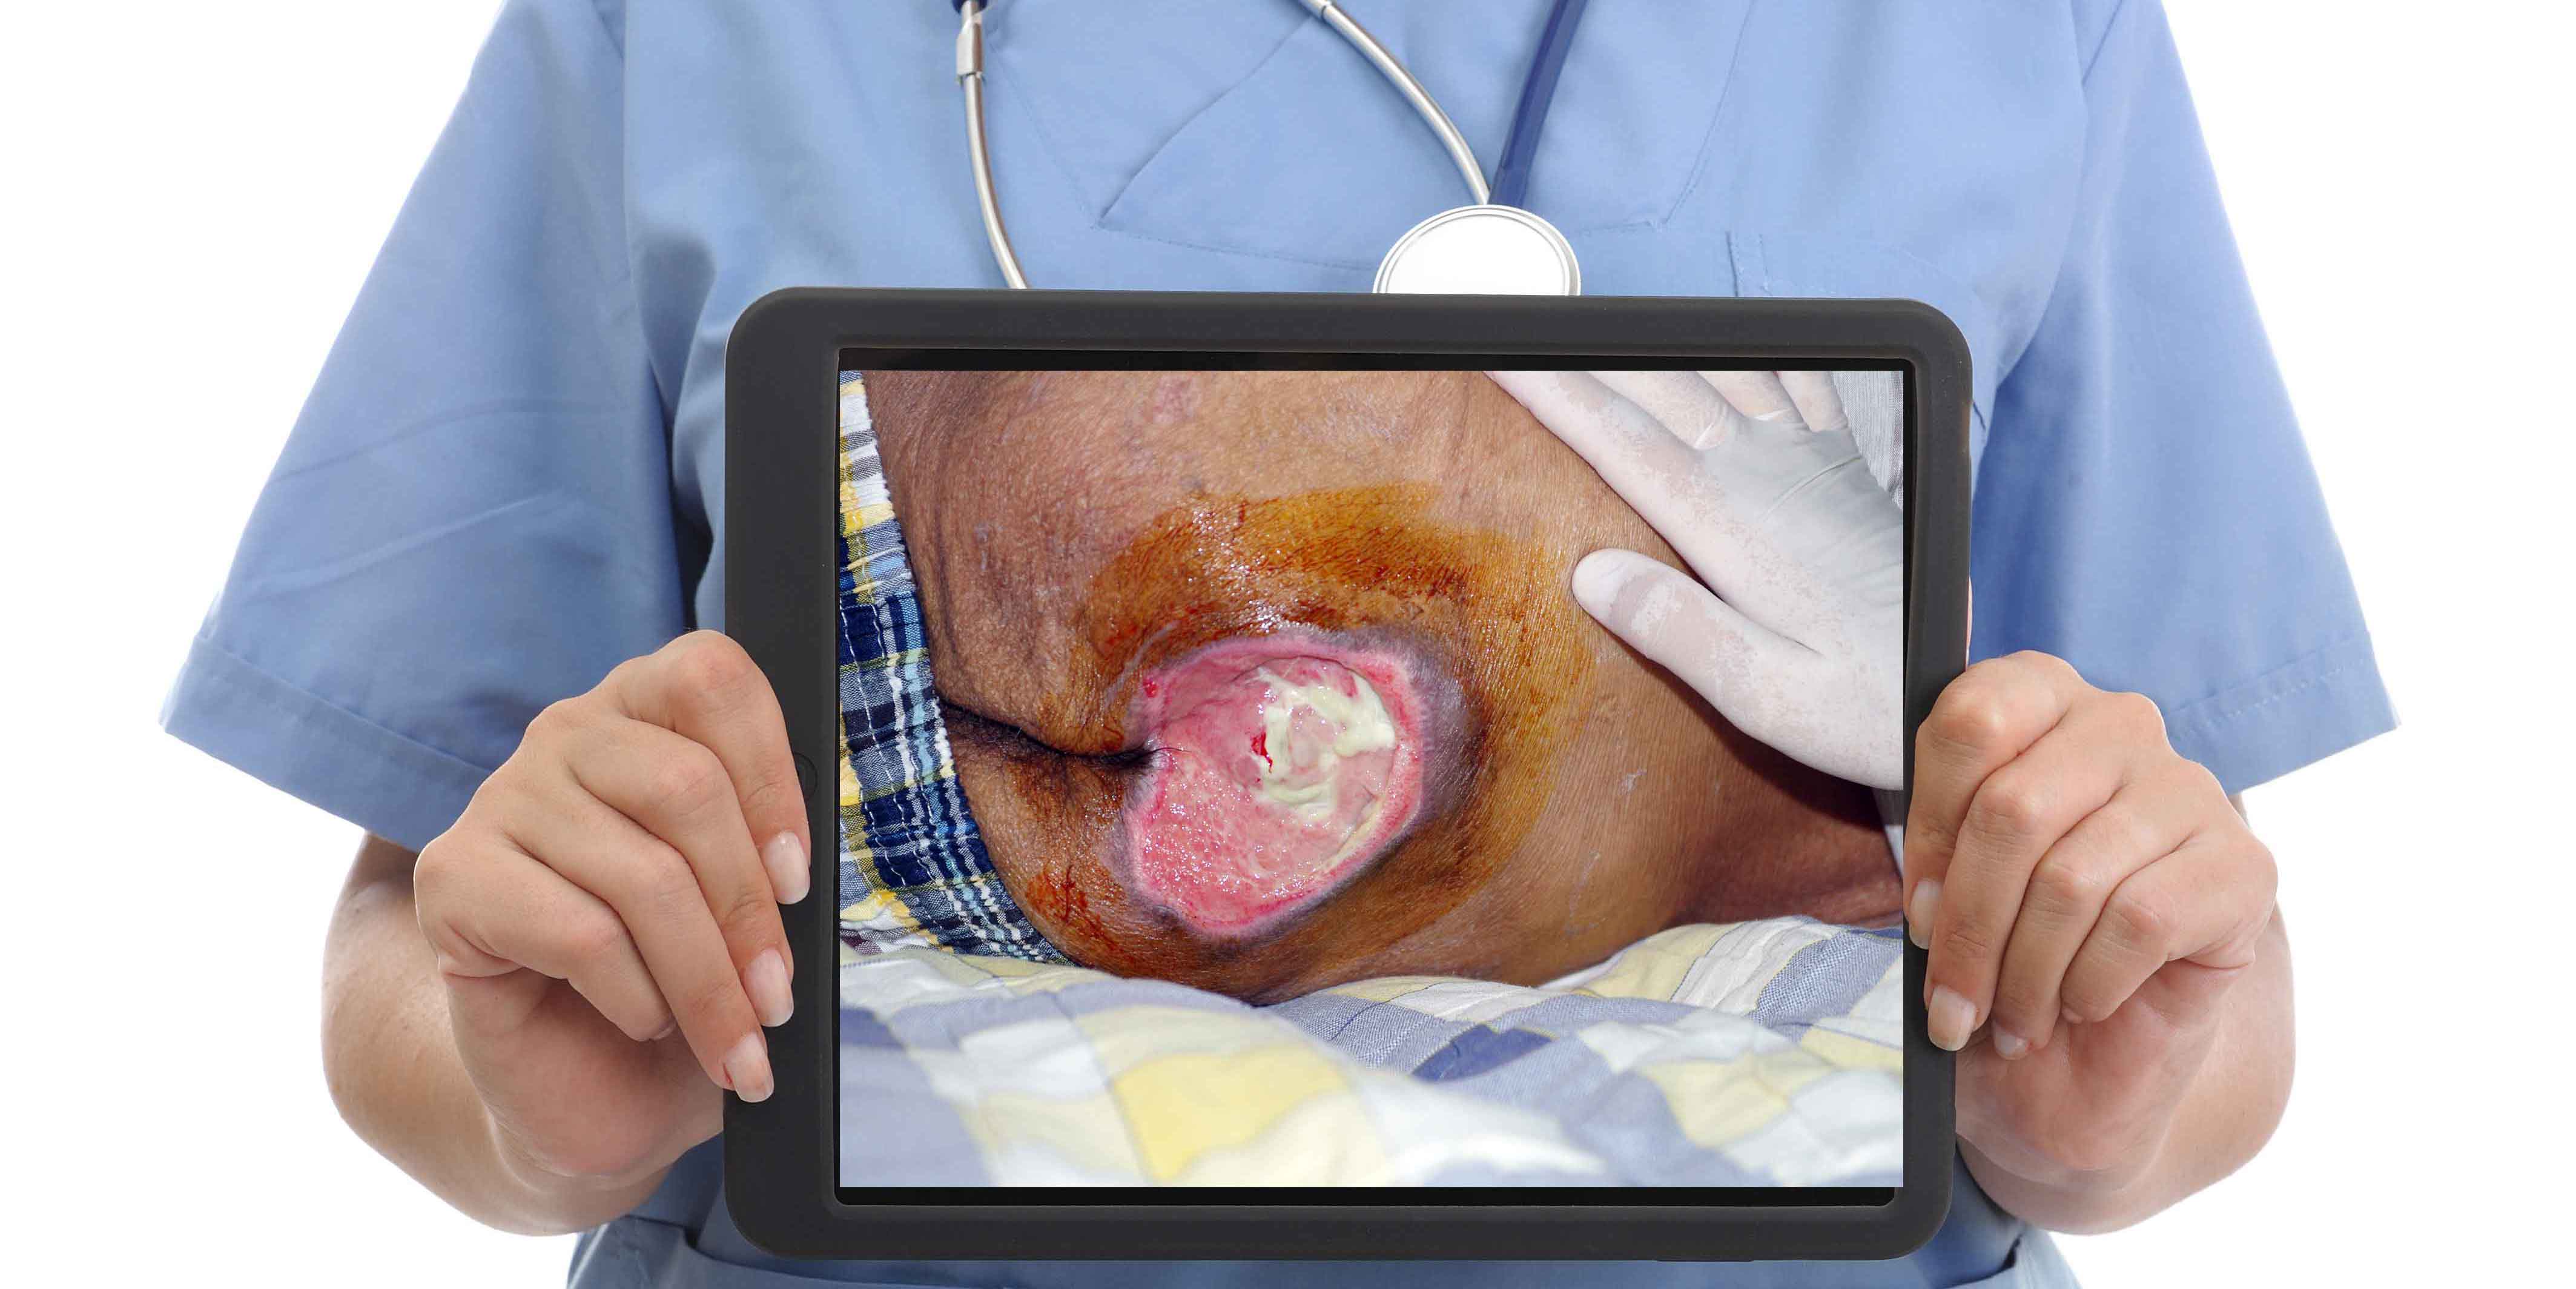 A clinician holds a tablet with a picture of a patient wound on it.